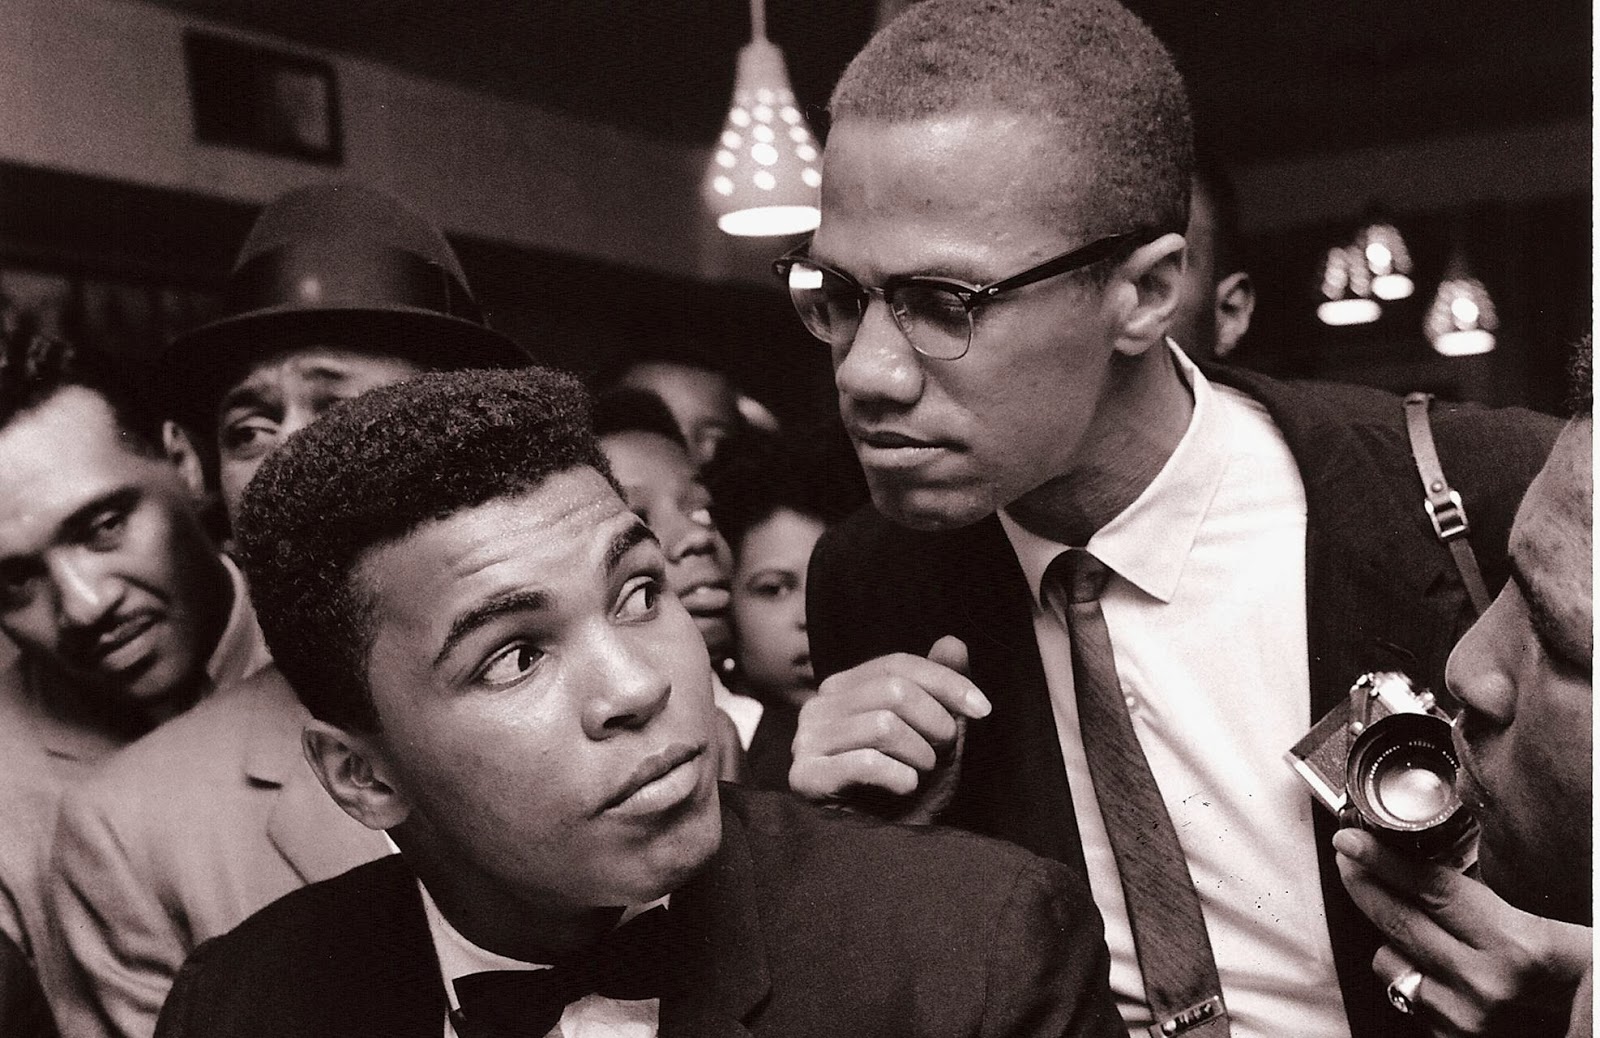 Malcolm X Kidding around with Muhammad Ali after Sonny Liston fight